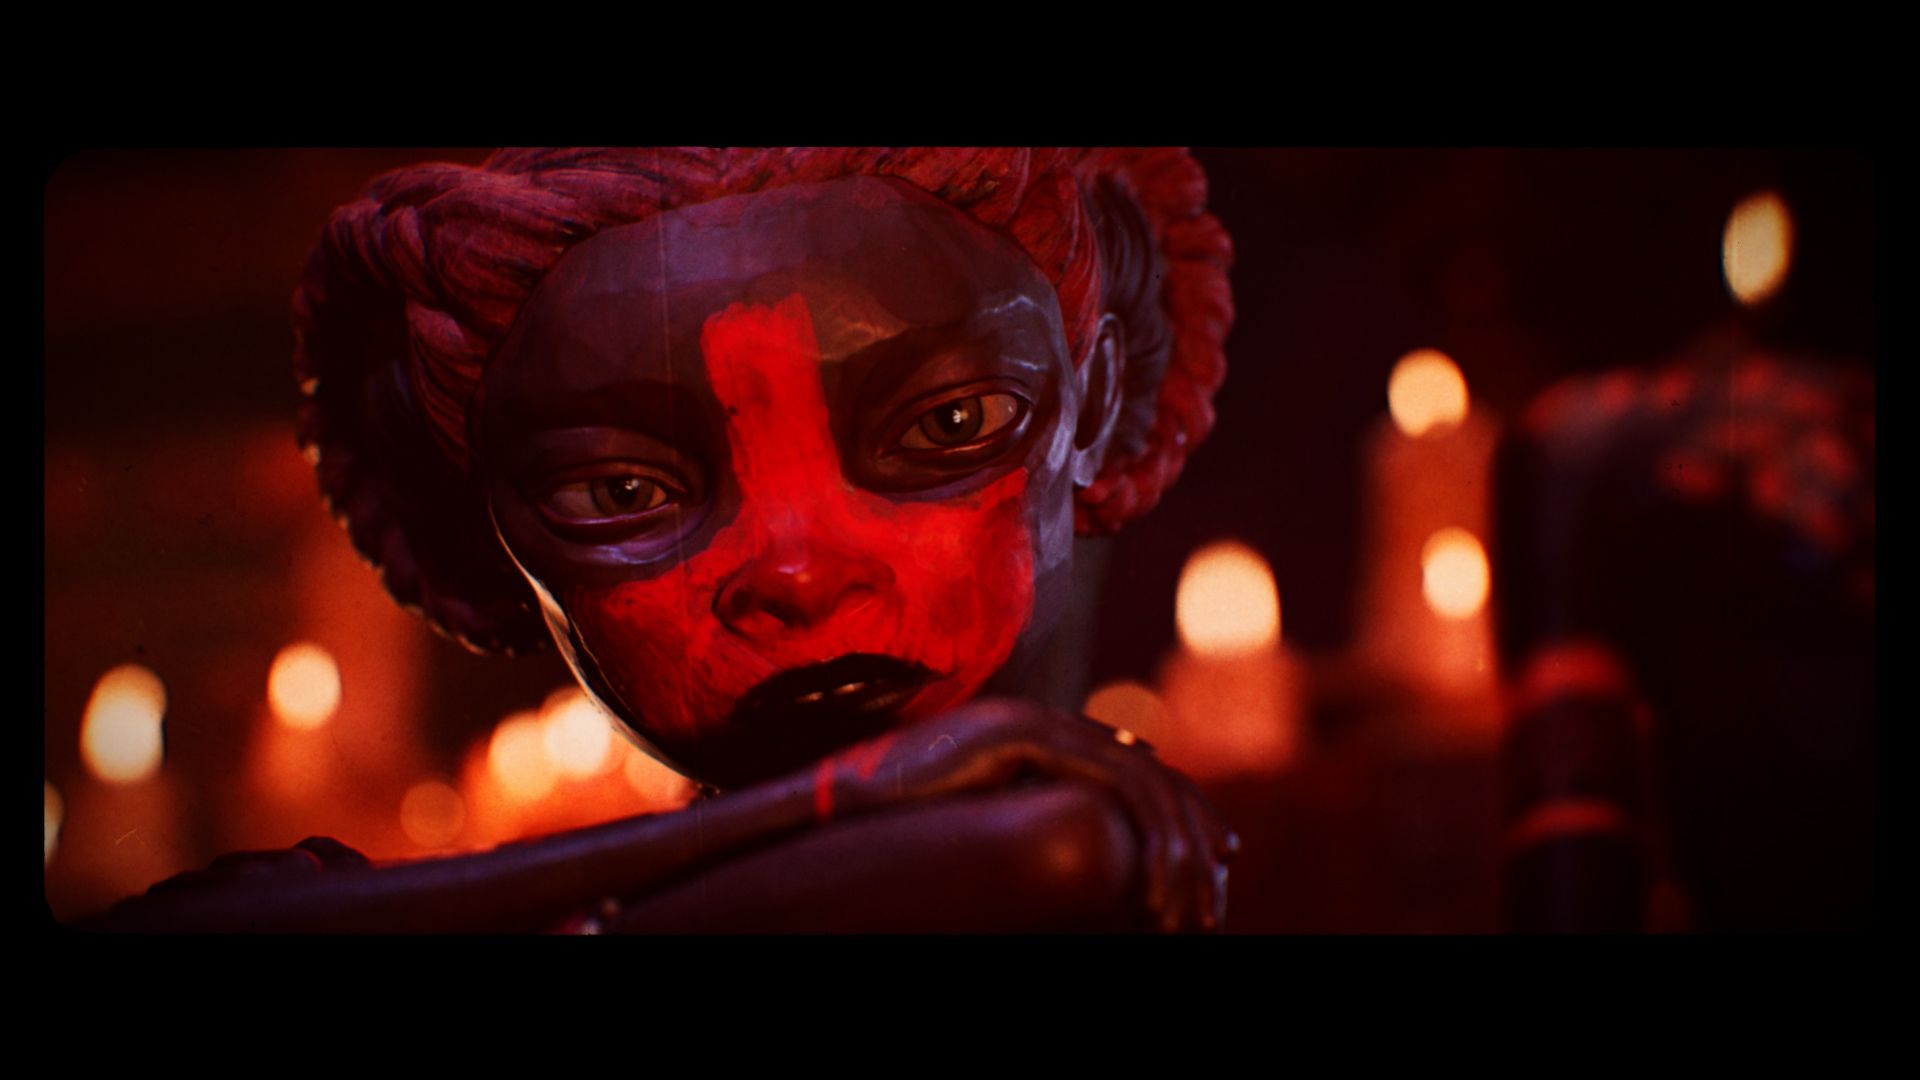 Screenshot from The Voice in the Hollow by Miguel Ortega and Tran Ma created using Unreal Engine